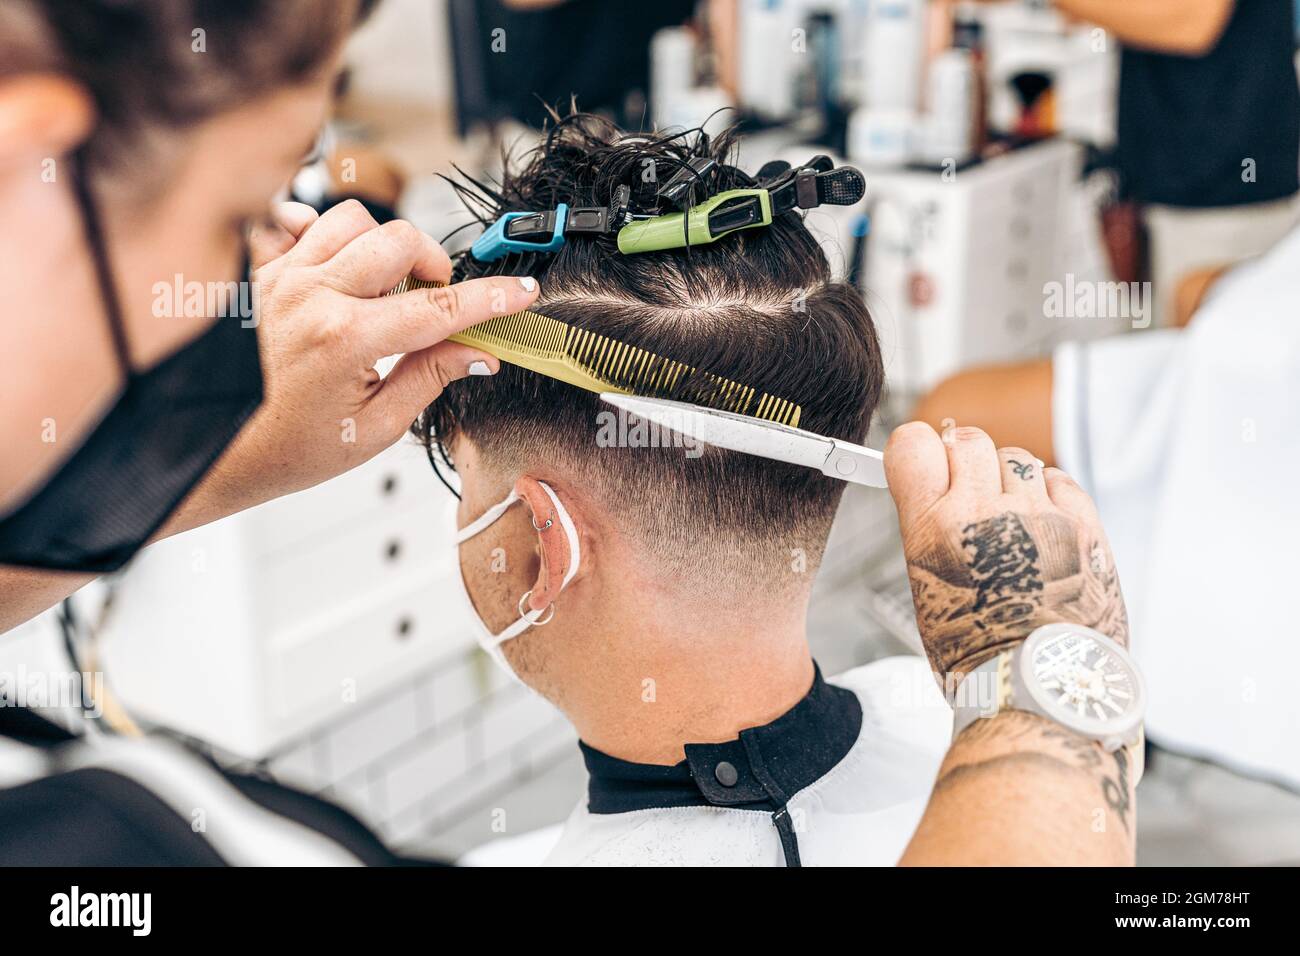 Close up view photo of a hairdresser cutting the hair of a young man Stock Photo